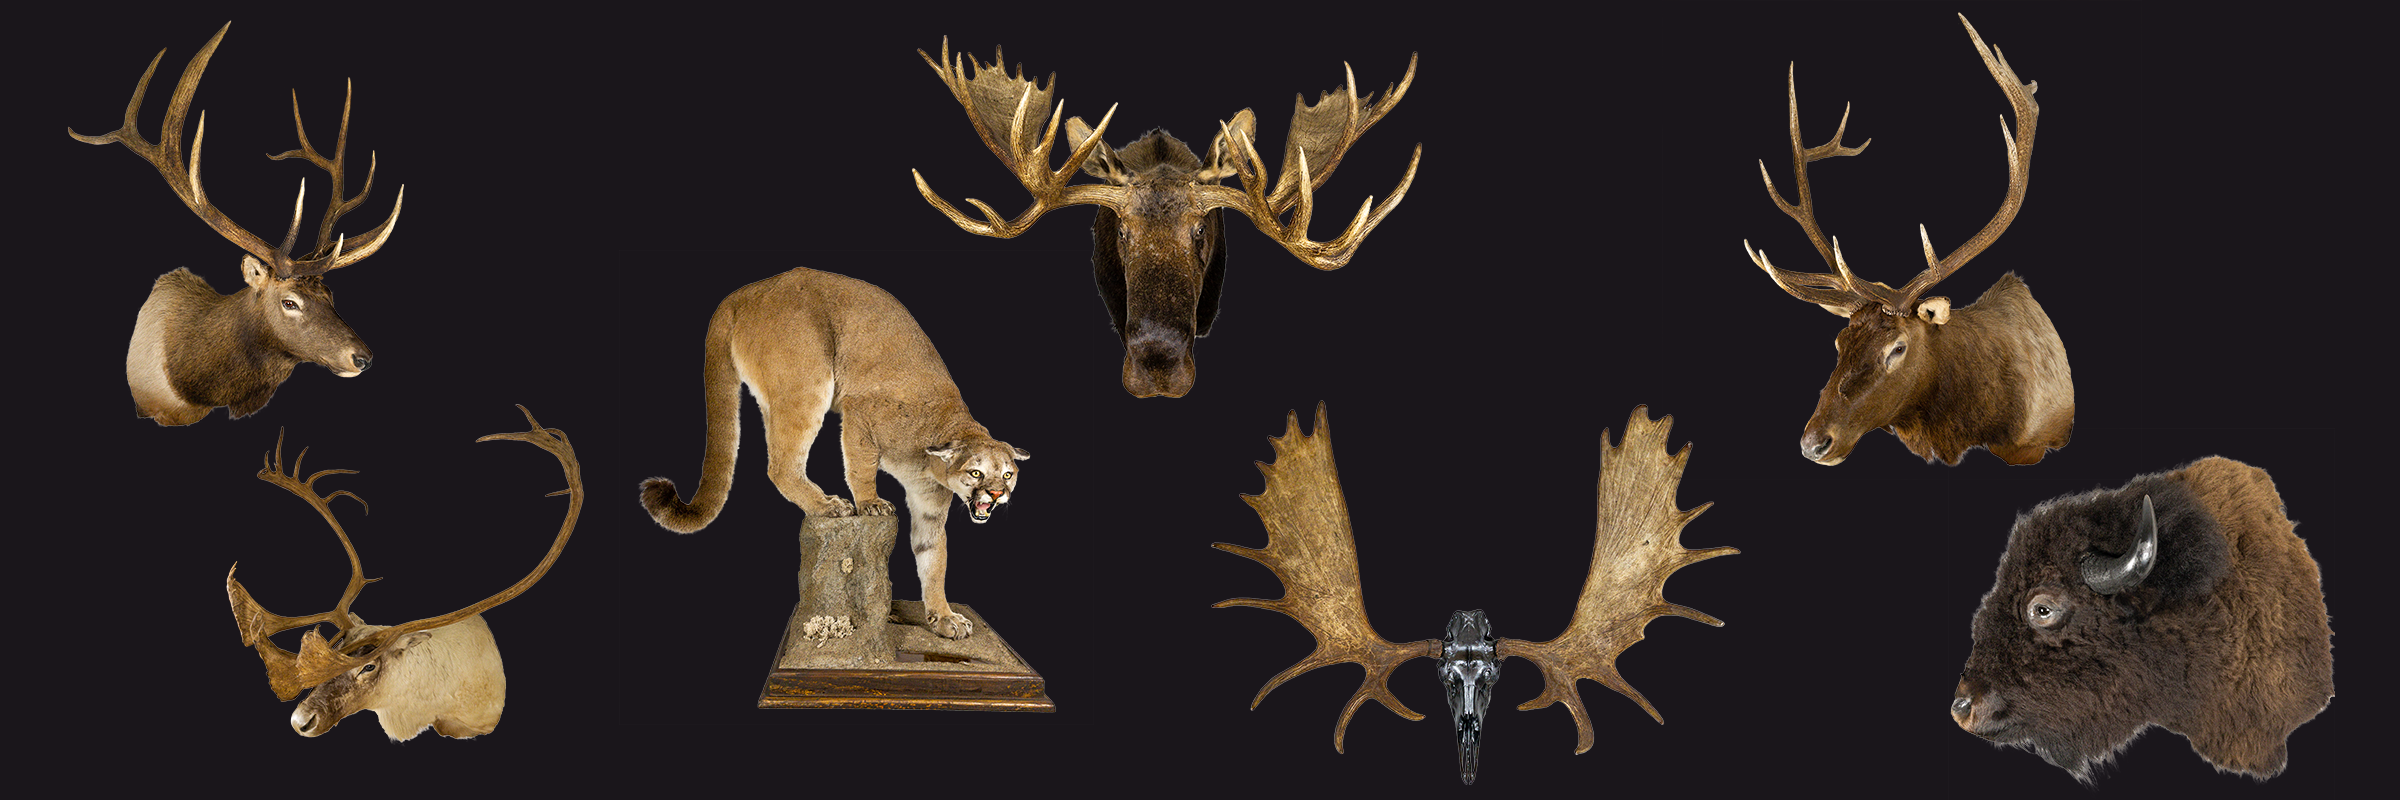 A banner image with a collage of taxidermy animals including a moose, cougar, bison, elk, and caribou